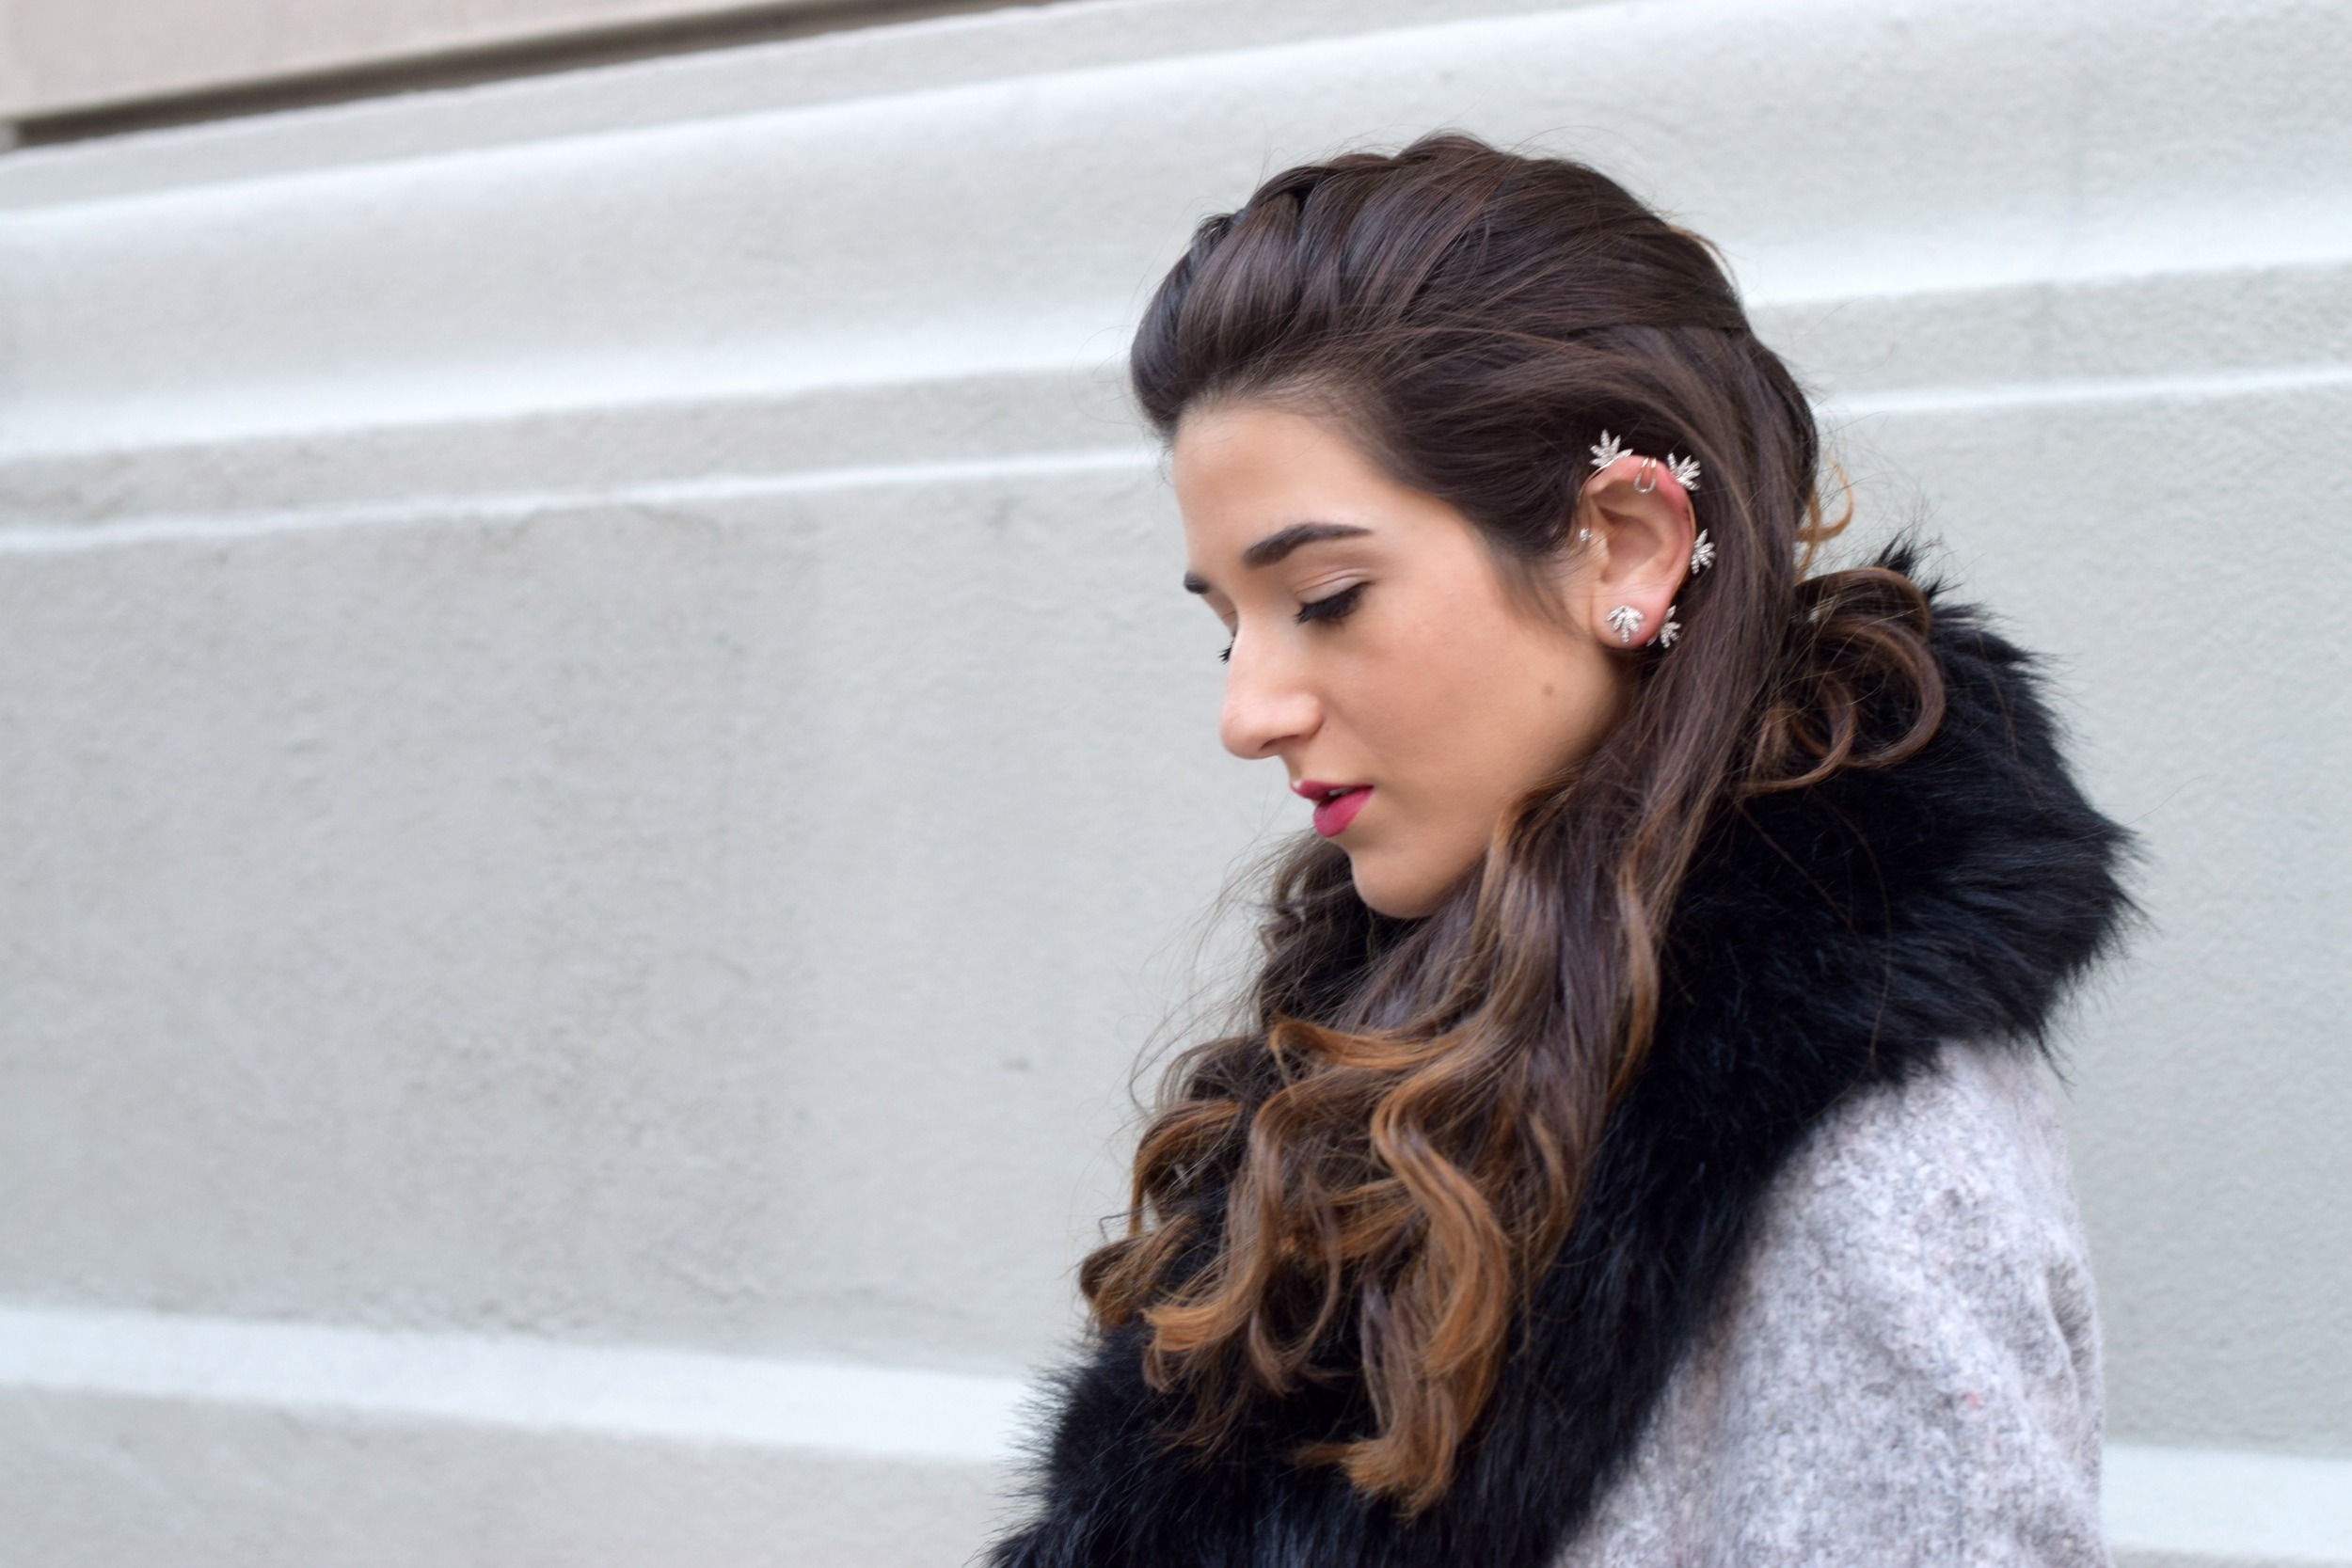 Dripping In Diamonds Elahn Jewels Louboutins & Love Fashion Blog Esther Santer NYC Street Style Blogger Black Fur Stole Earrings Jewelry Grey Peacoat Coat Winter Wear Shopping Beauty Rings Chic Red Heels Sandals Inspo Inspiration Hair OOTD Outfit Zara.jpg